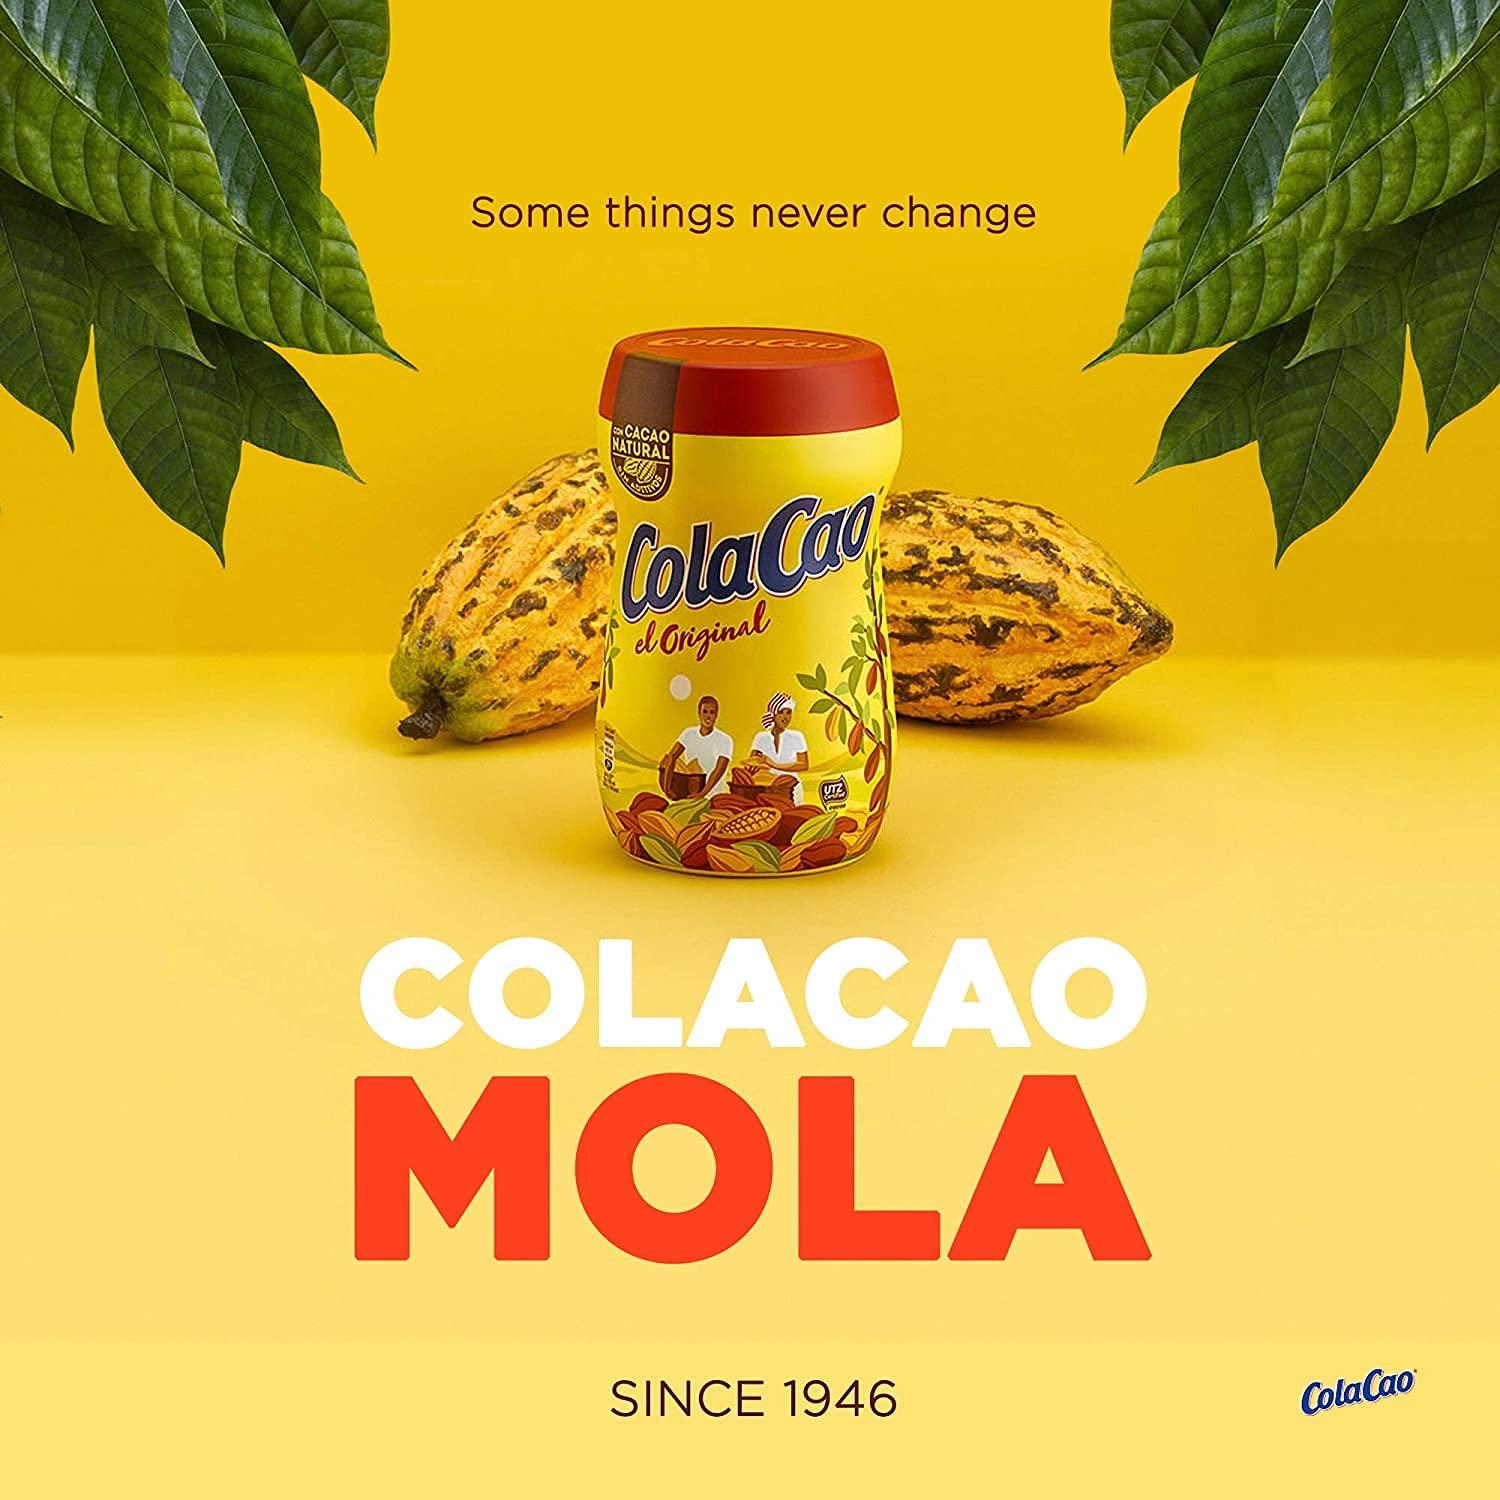 ColaCao Original Chocolate Drink Mix, Made with Natural Cocoa